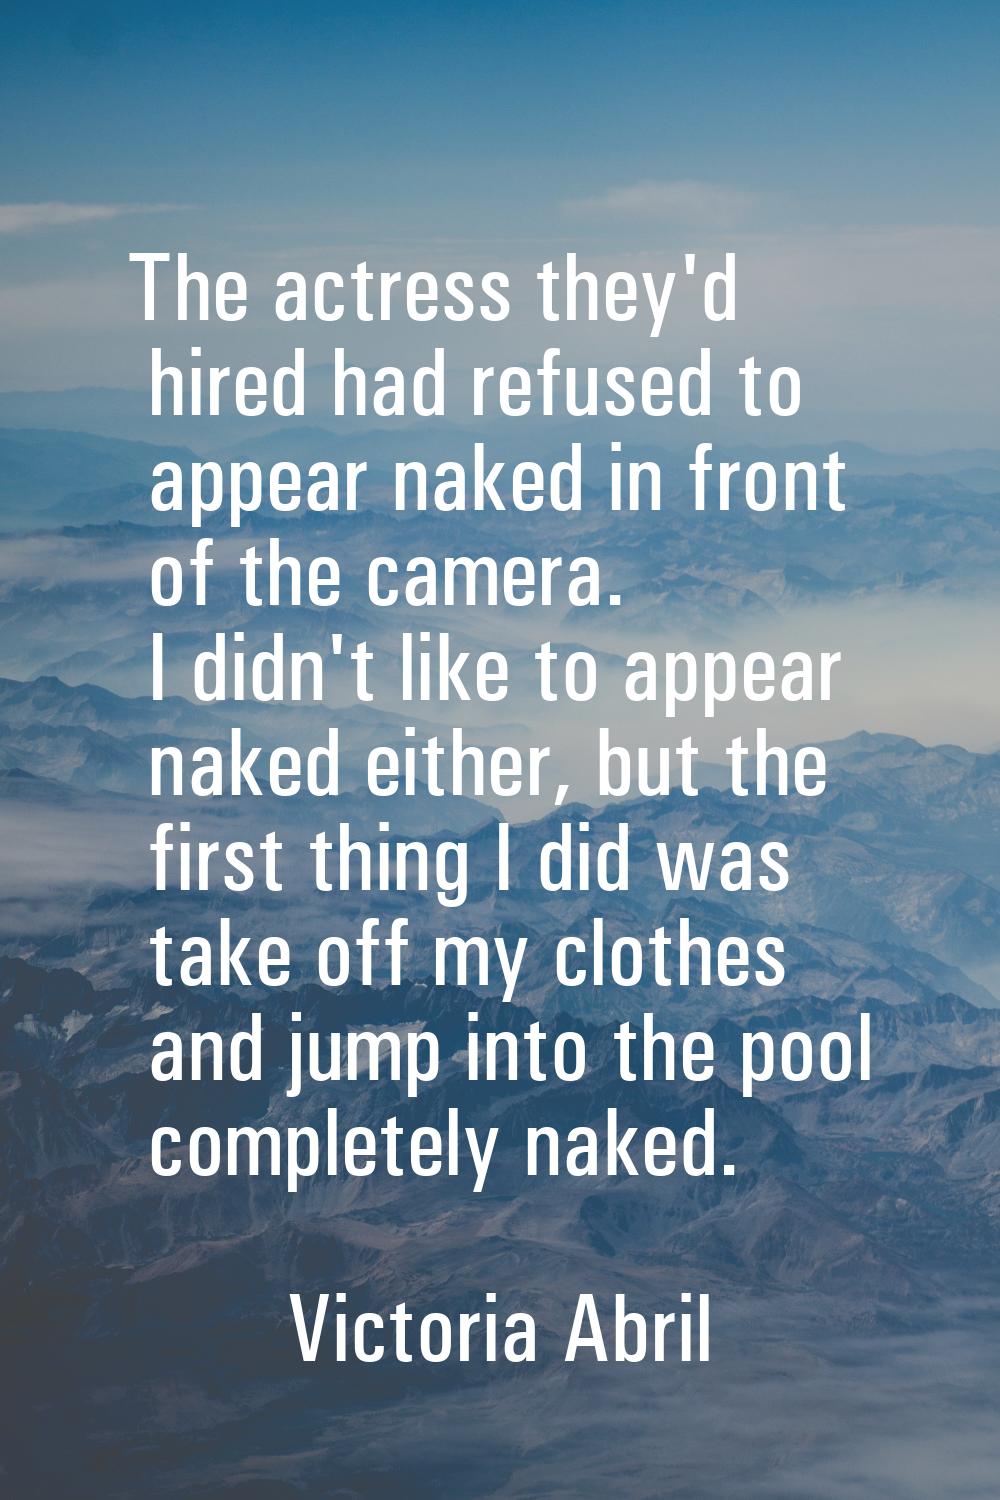 The actress they'd hired had refused to appear naked in front of the camera. I didn't like to appea